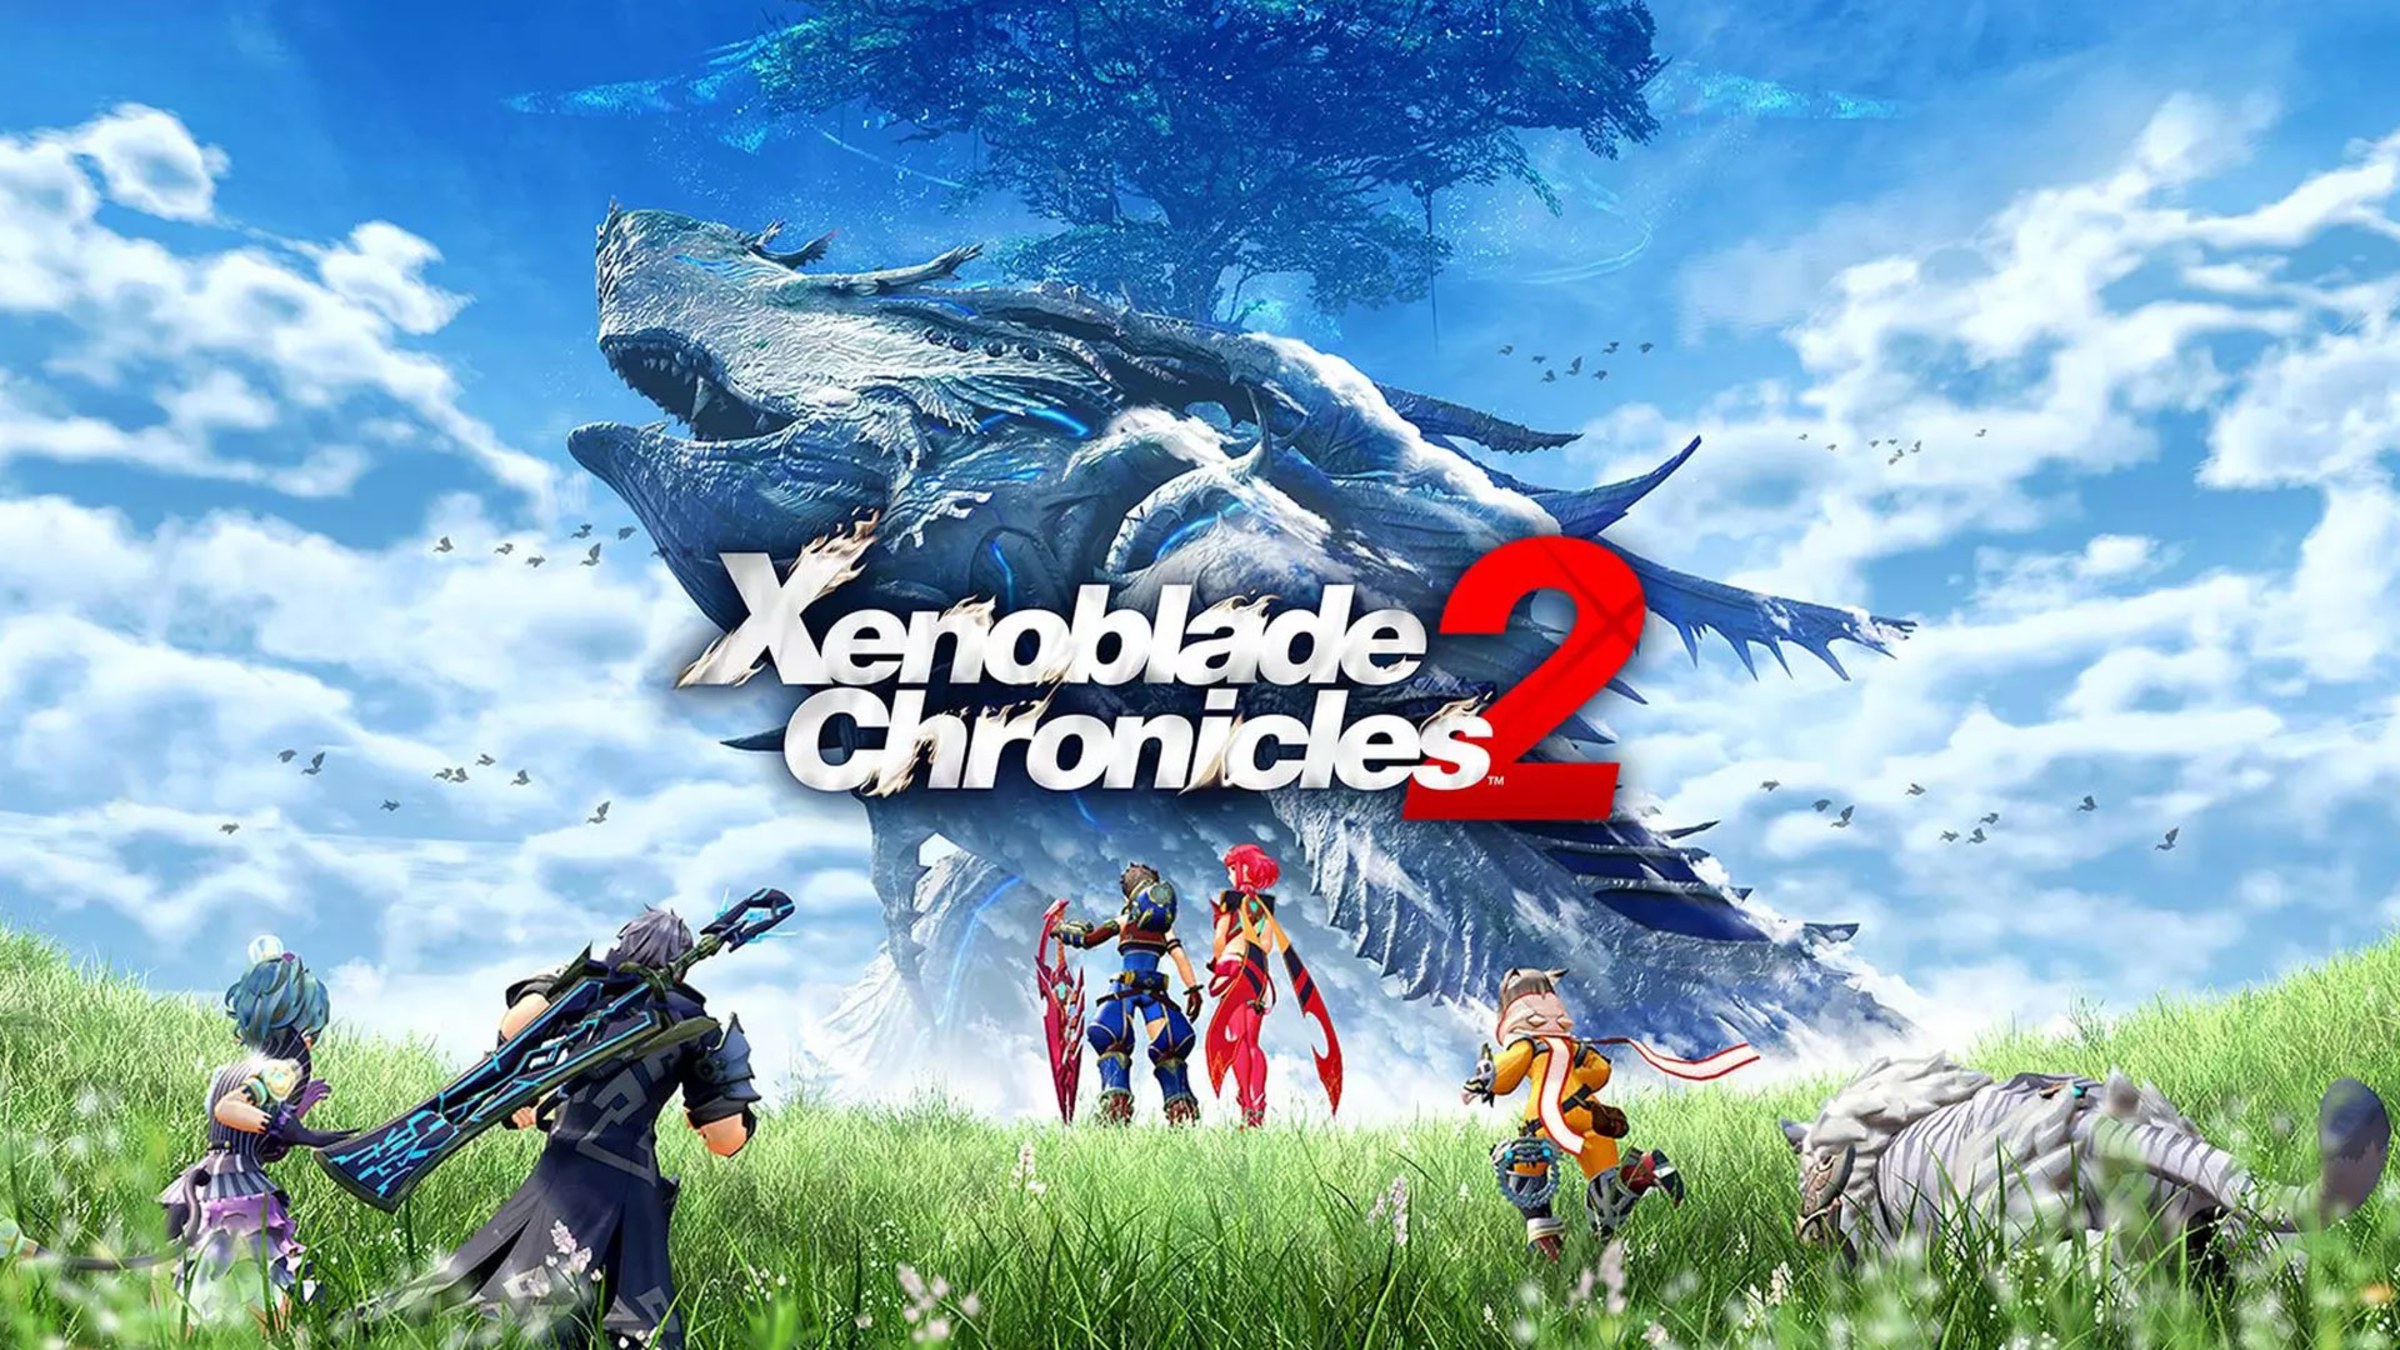 Xenoblade Chronicles: Definitive Edition (for Nintendo Switch) Review